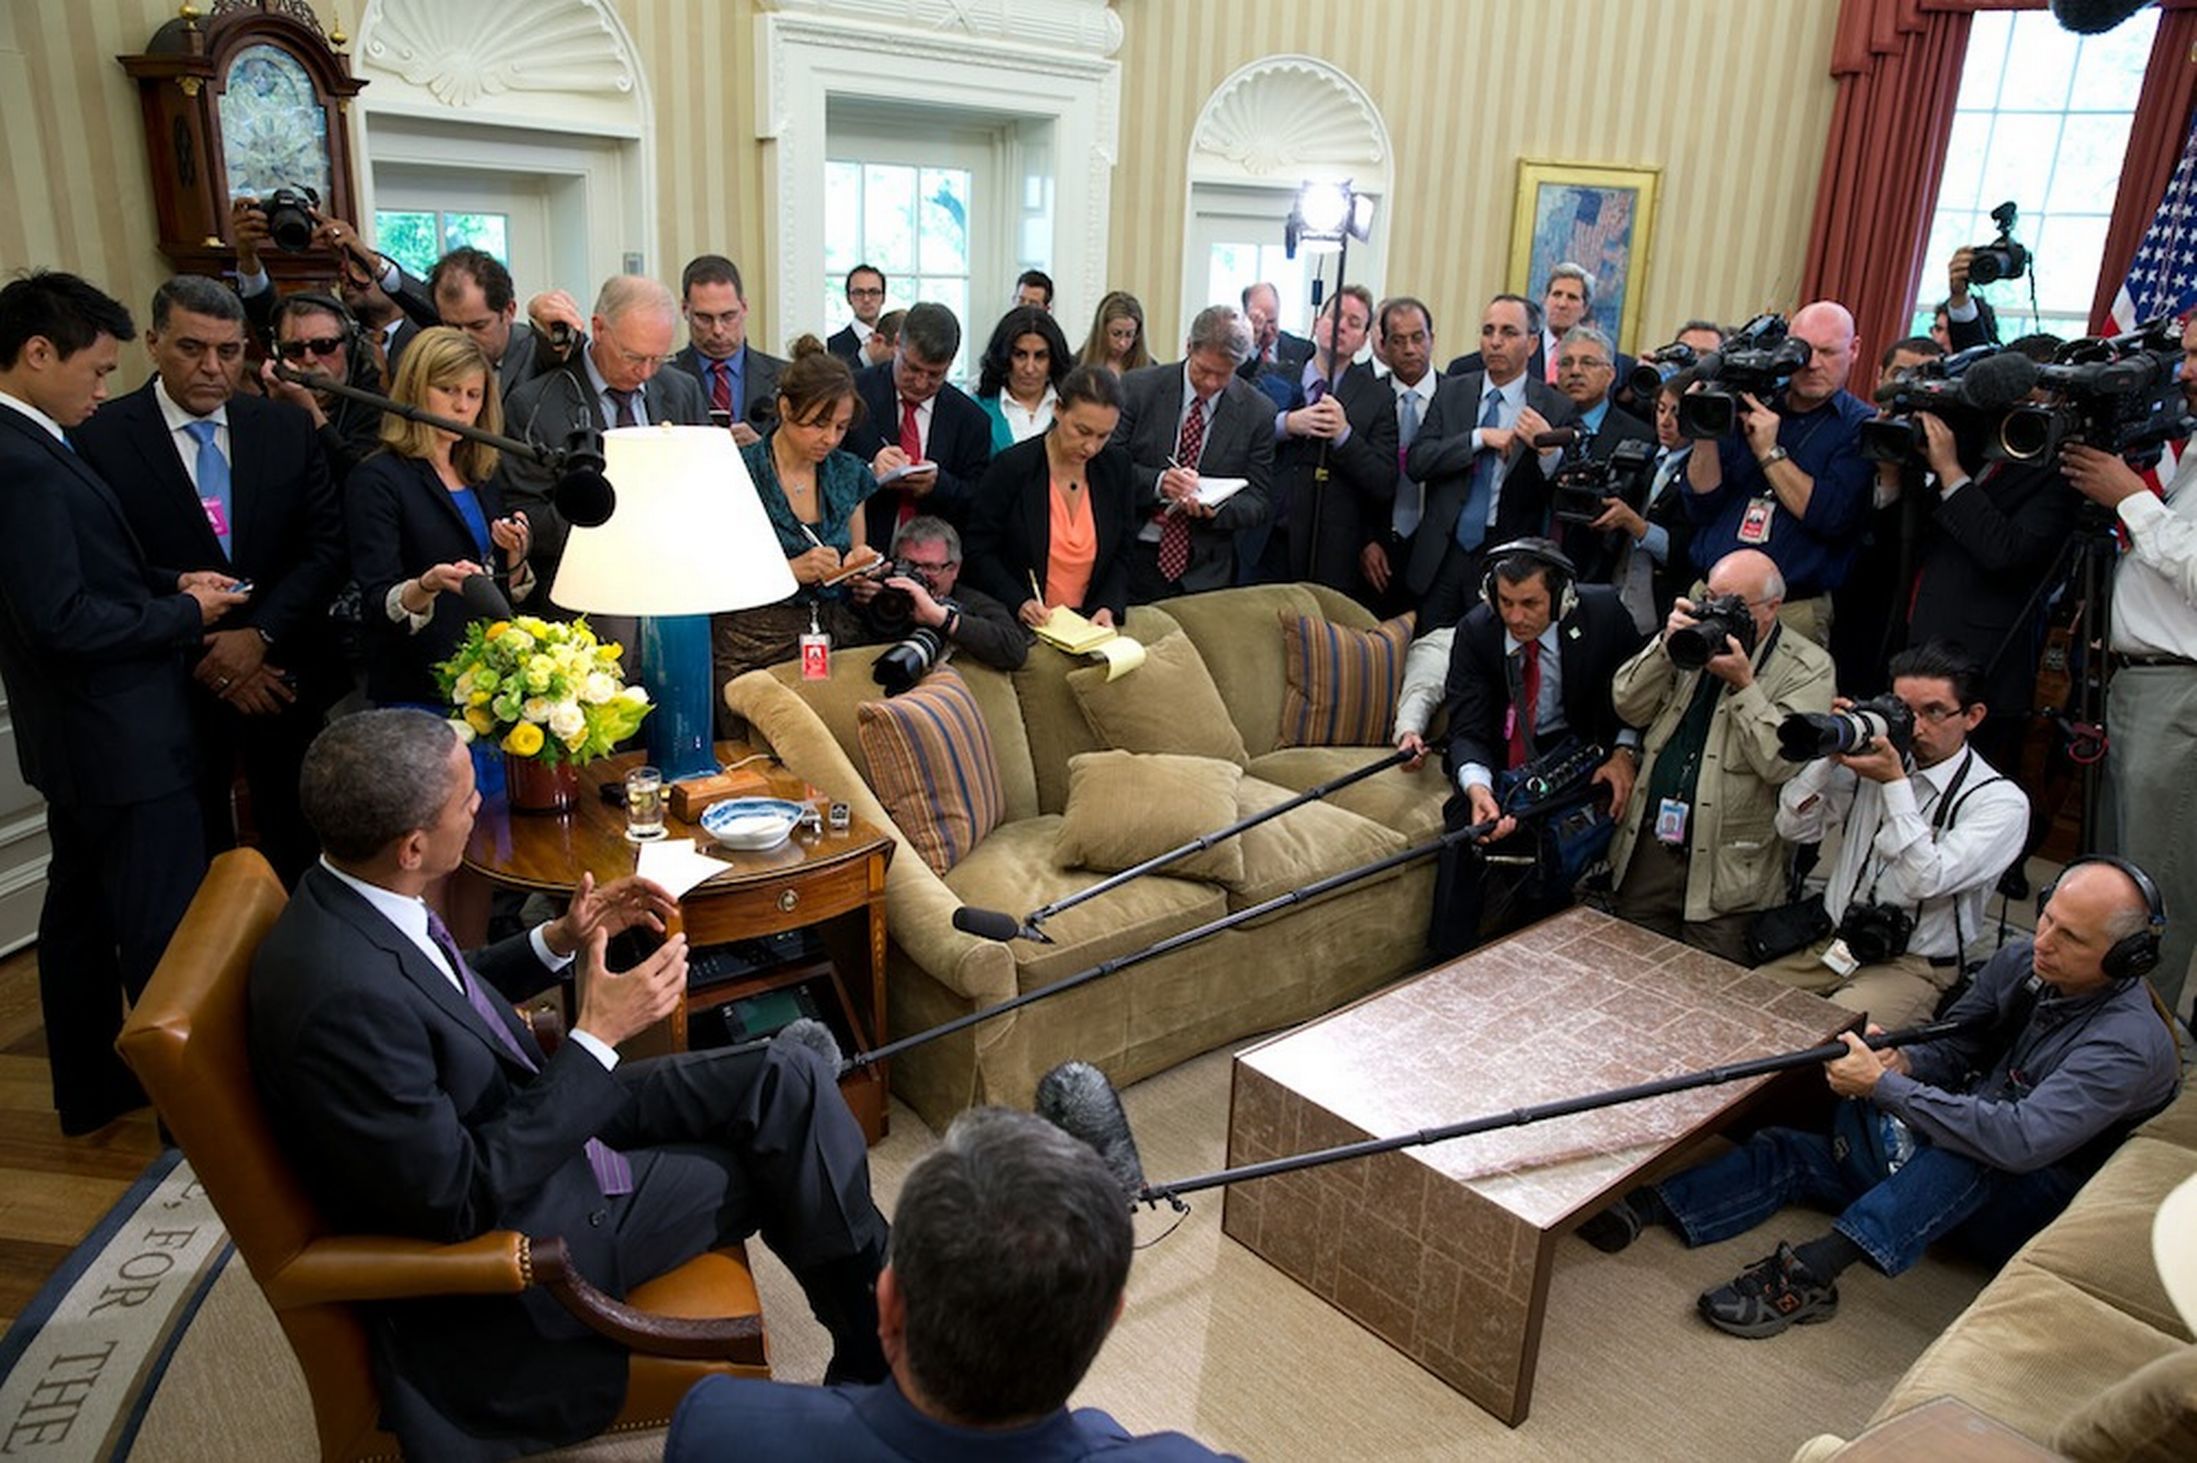 2013-A-year-inside-the-White-House-2977043